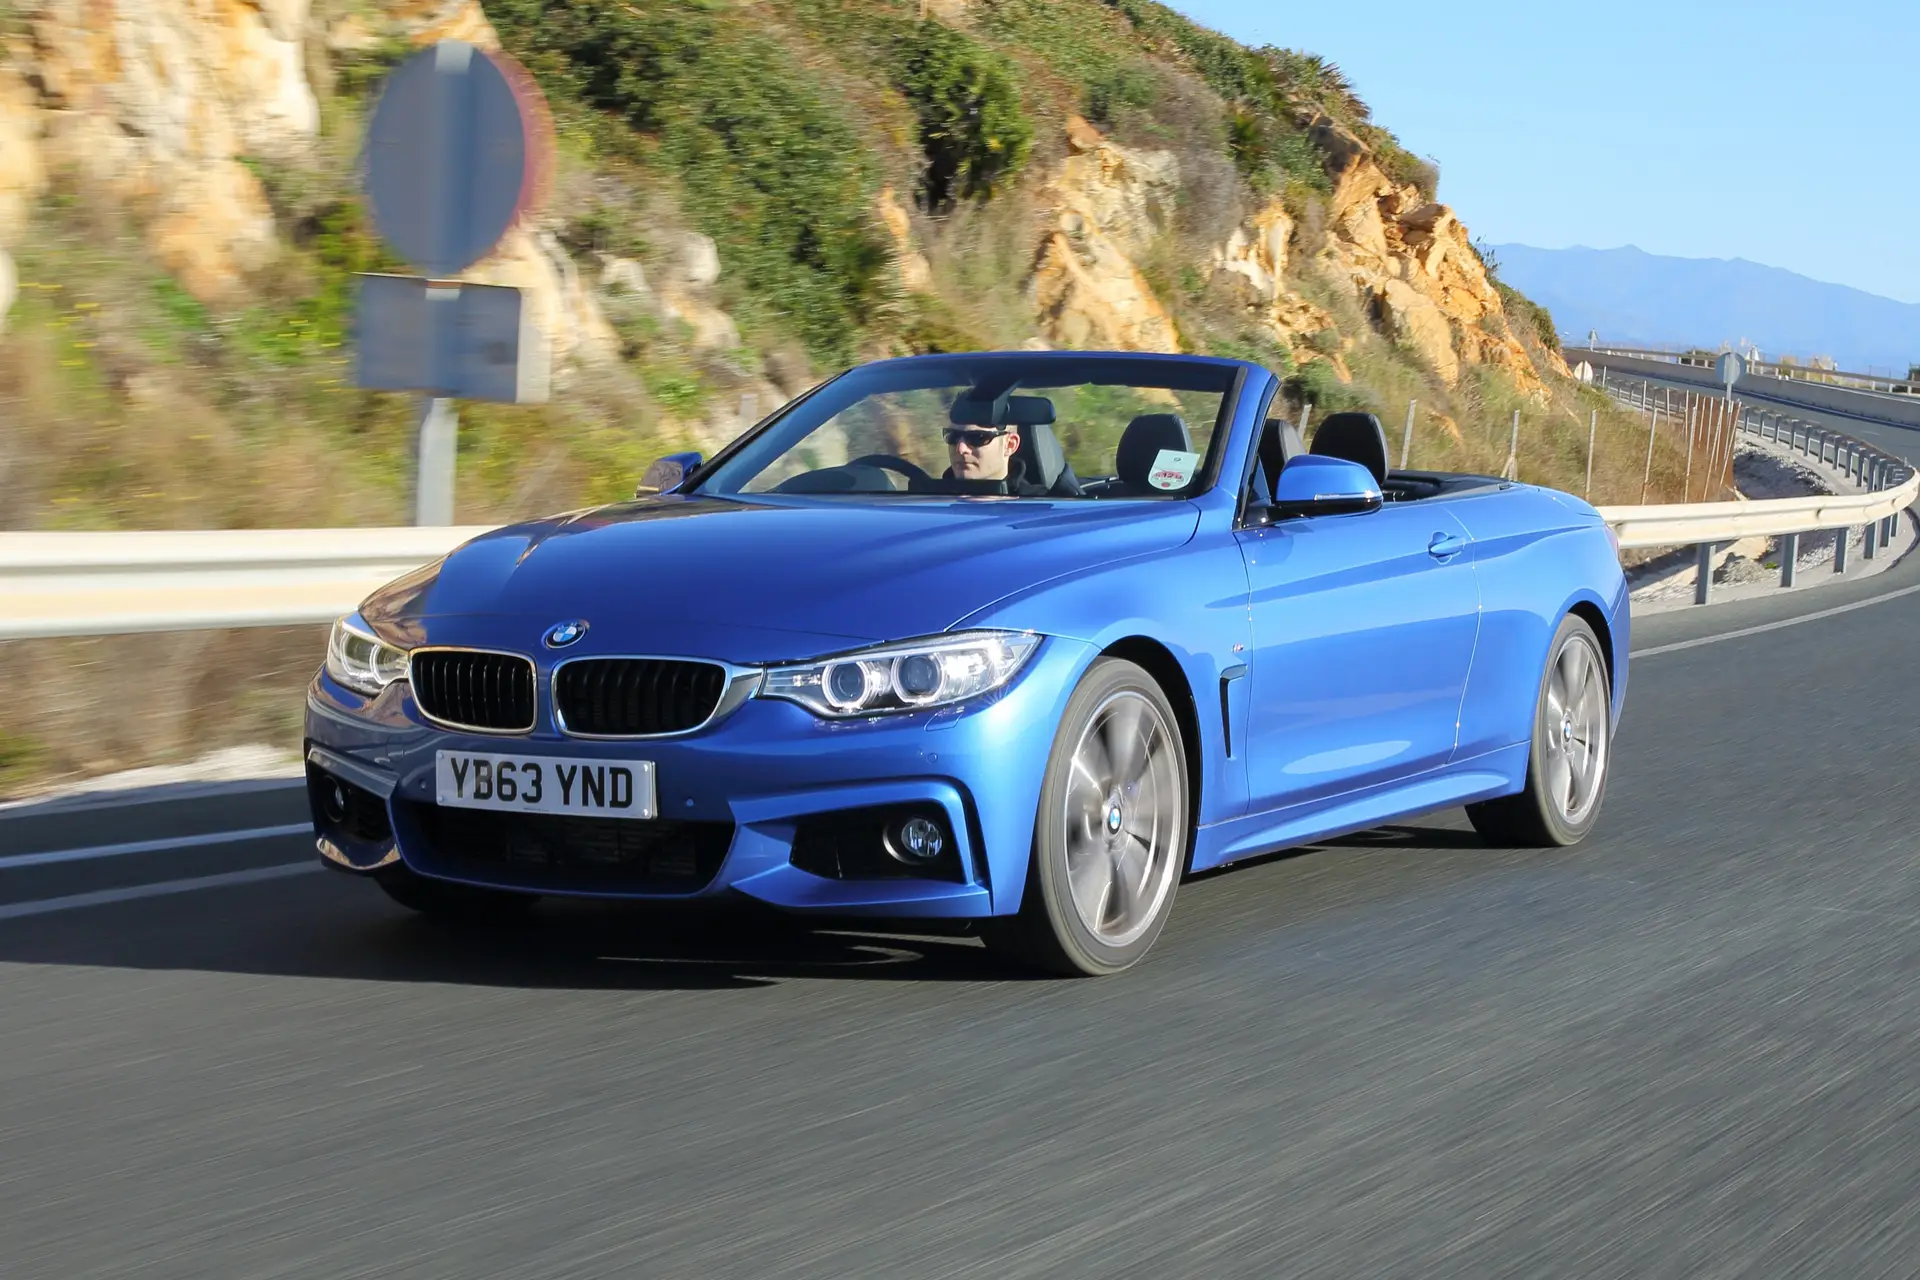 BMW 4 Series Convertible (2014-2020) Review: exterior front three quarter photo of the BMW 4 Series Convertible on the road